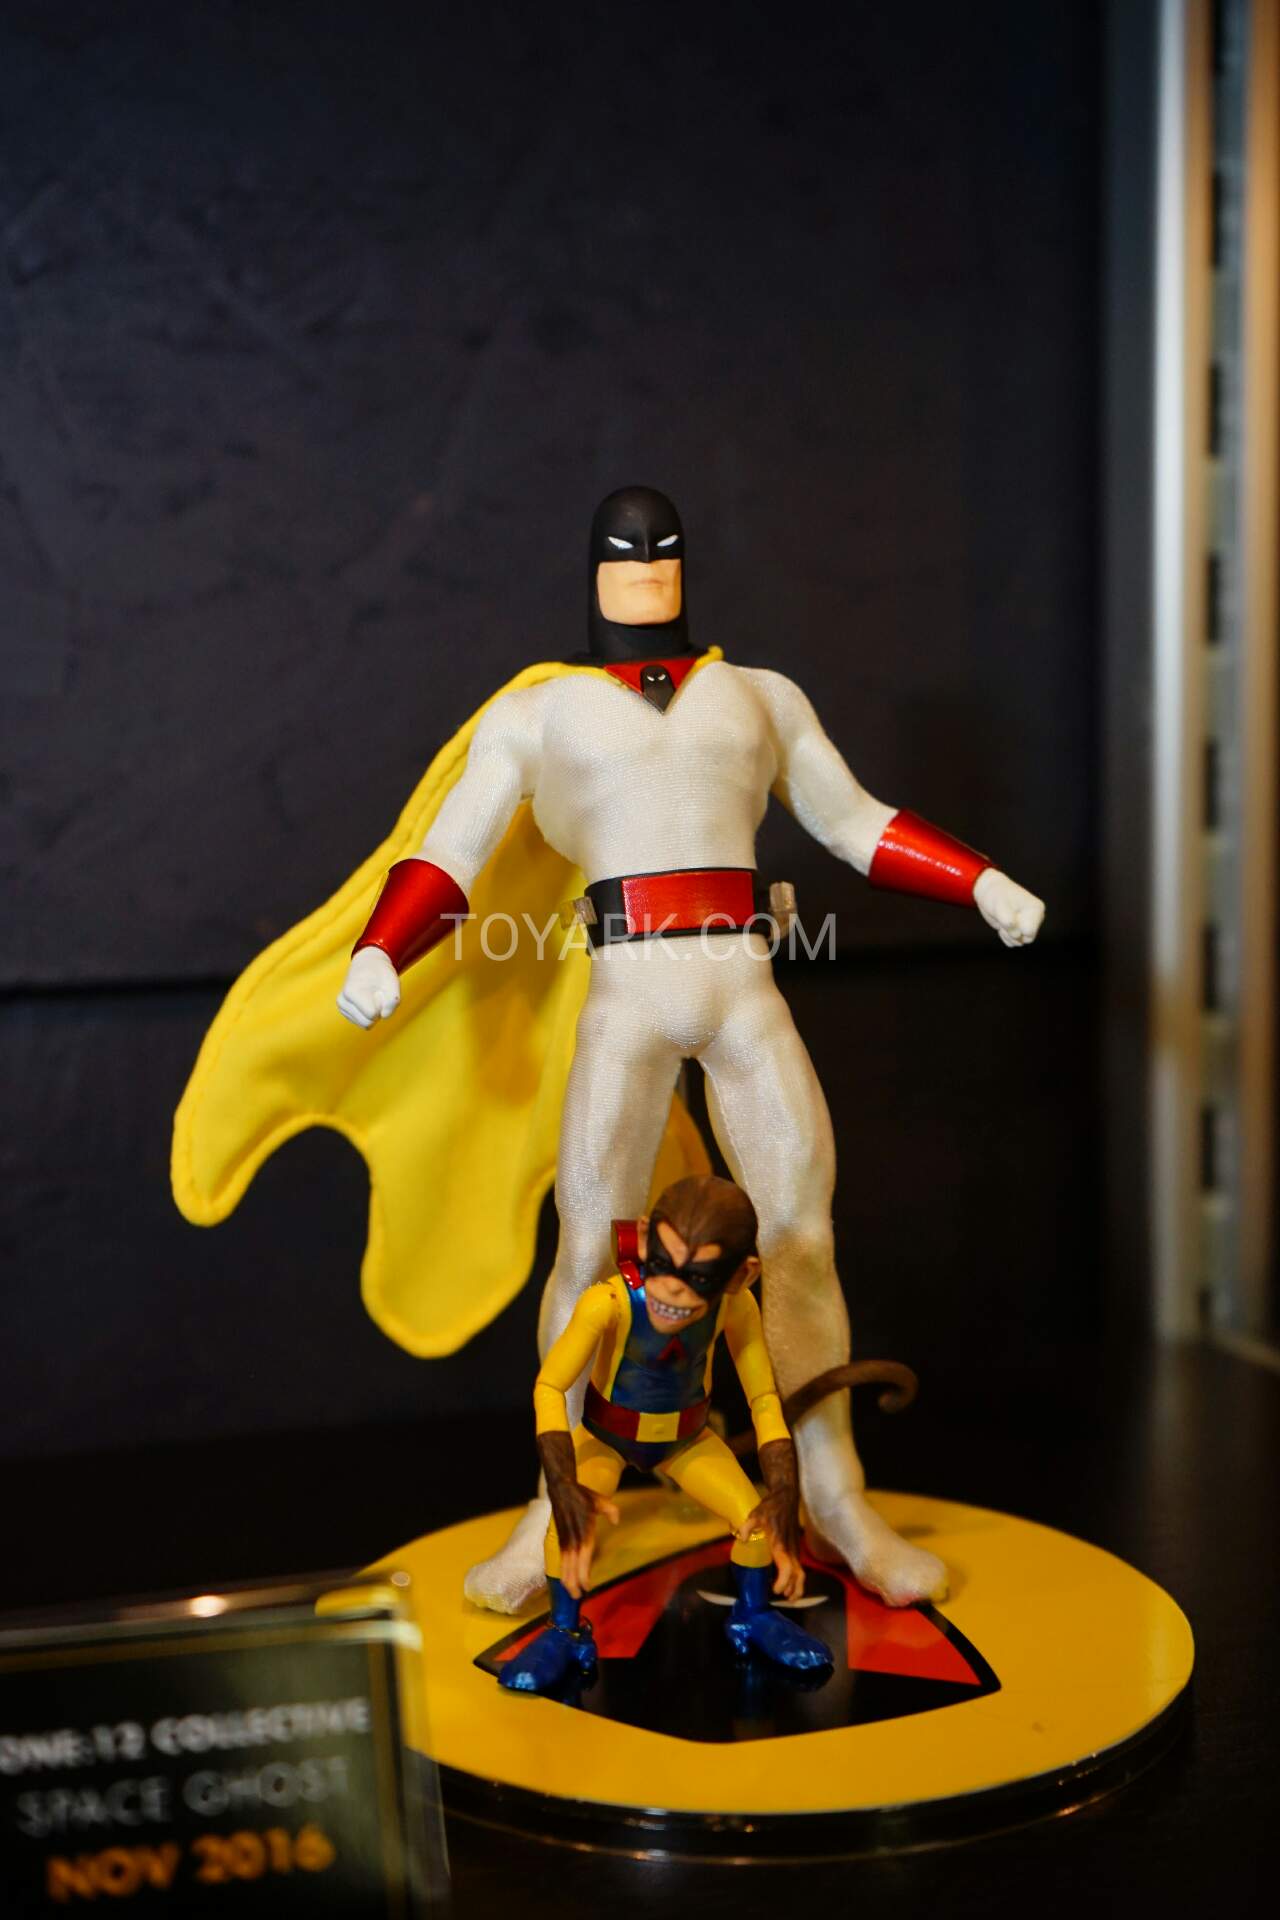 [Mezco] One:12 Collective - Space Ghost Mezco-One12-Collective-016